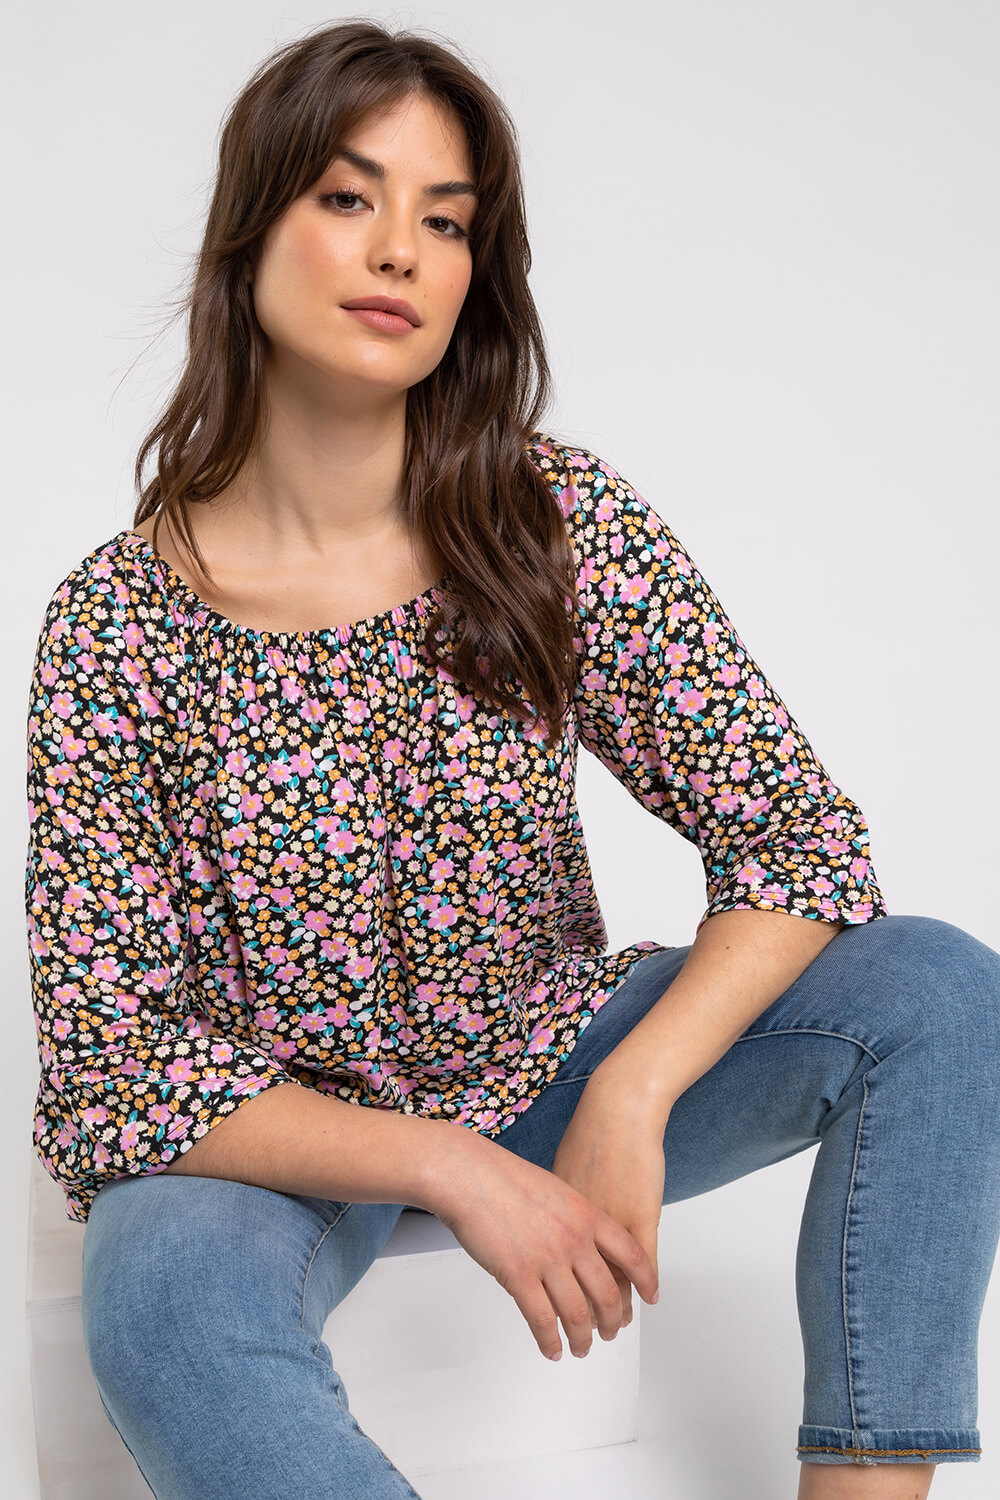 PINK Curve Ditsy Floral Frill Sleeve Top, Image 5 of 5